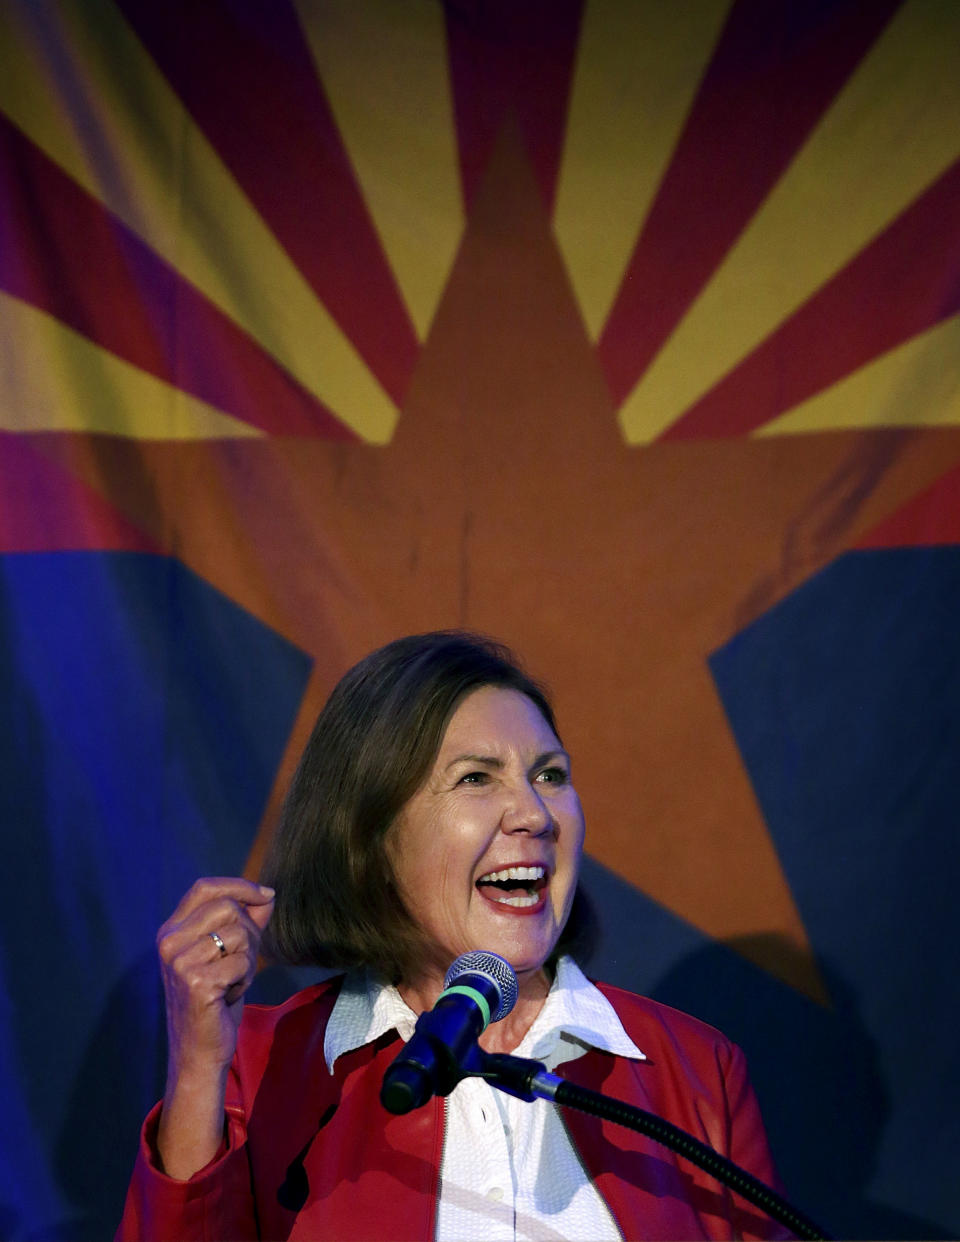 FILE - In this Nov. 6, 2018 file photo, Democrat Ann Kirkpatrick, candidate for Congressional District 2, gives a victory speech during the Pima County Democratic Party Election Night watch party in Tucson, Ariz. Kirkpatrick, a five-term Arizona Democrat, announced Friday, March 12, 2021, she won't run for reelection in 2022 (Mike Christy/Arizona Daily Star via AP, File)